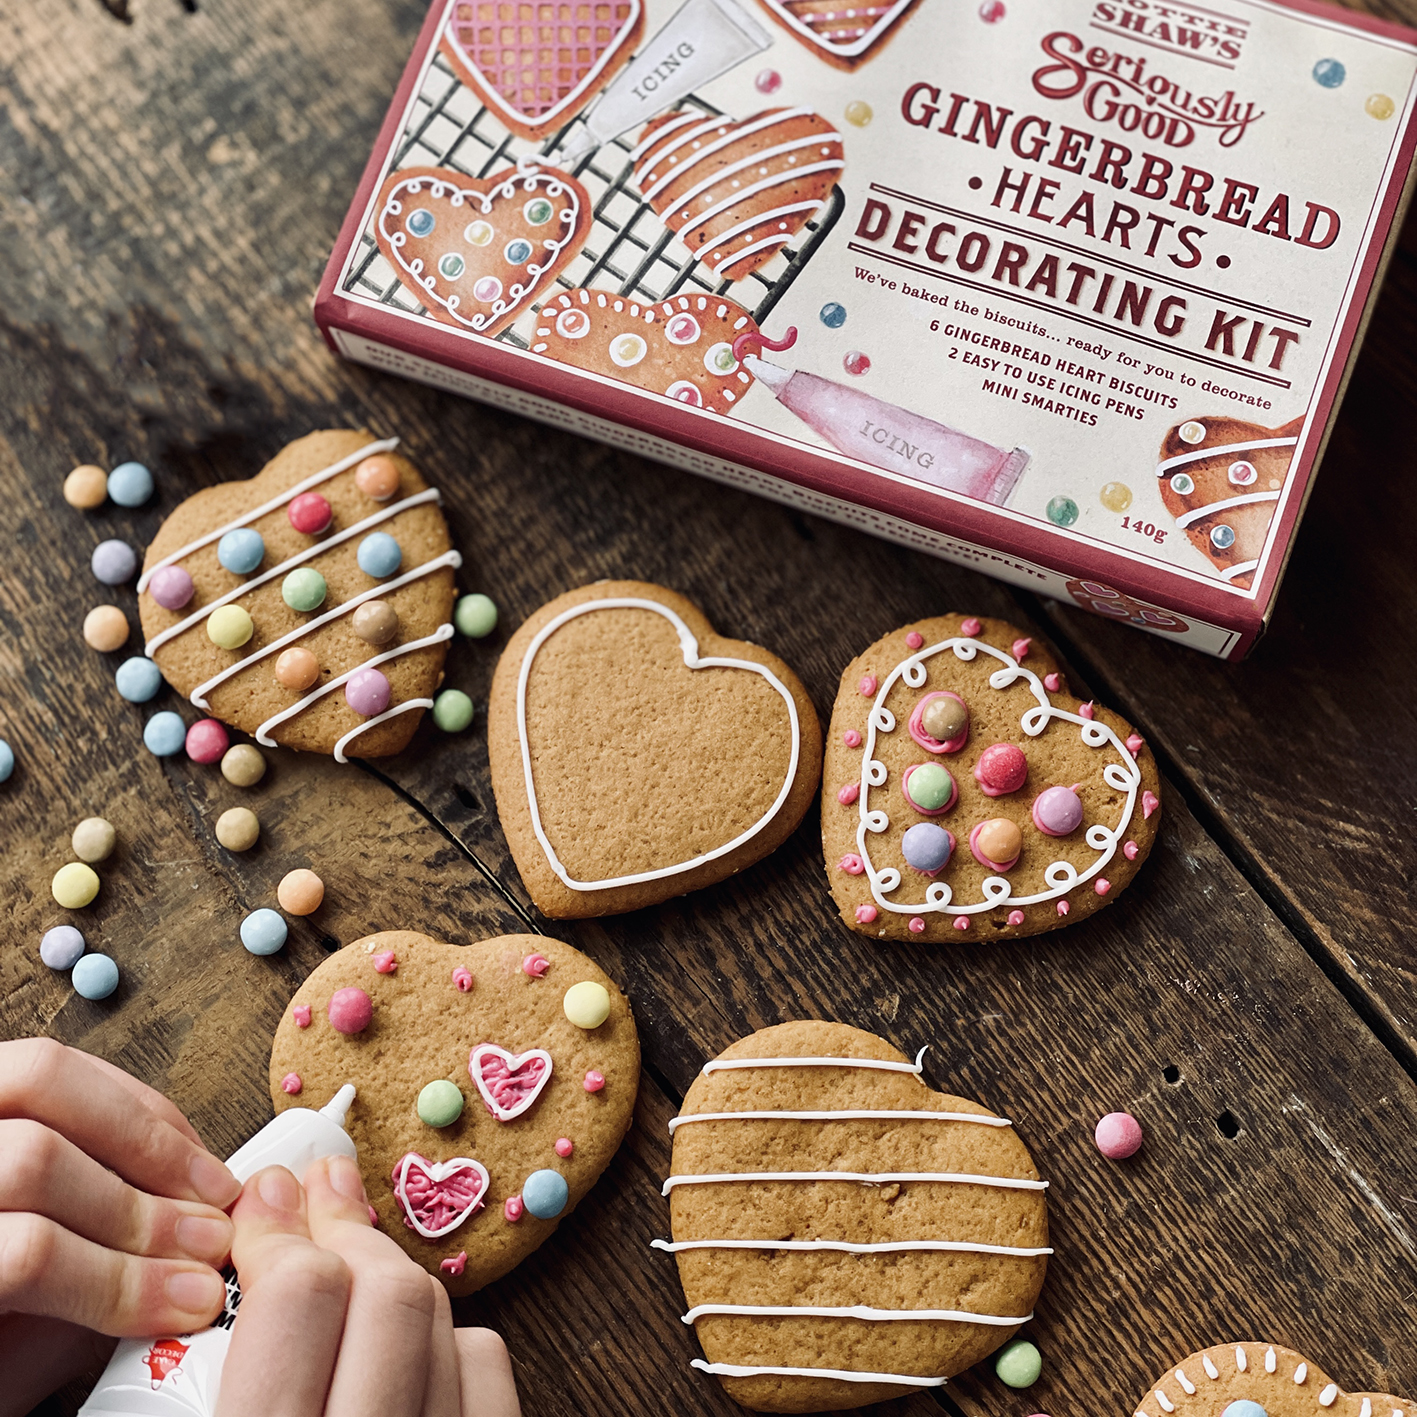 Icing Tips & Tricks | Our Gingerbread Decorating Kit |Lottie ...